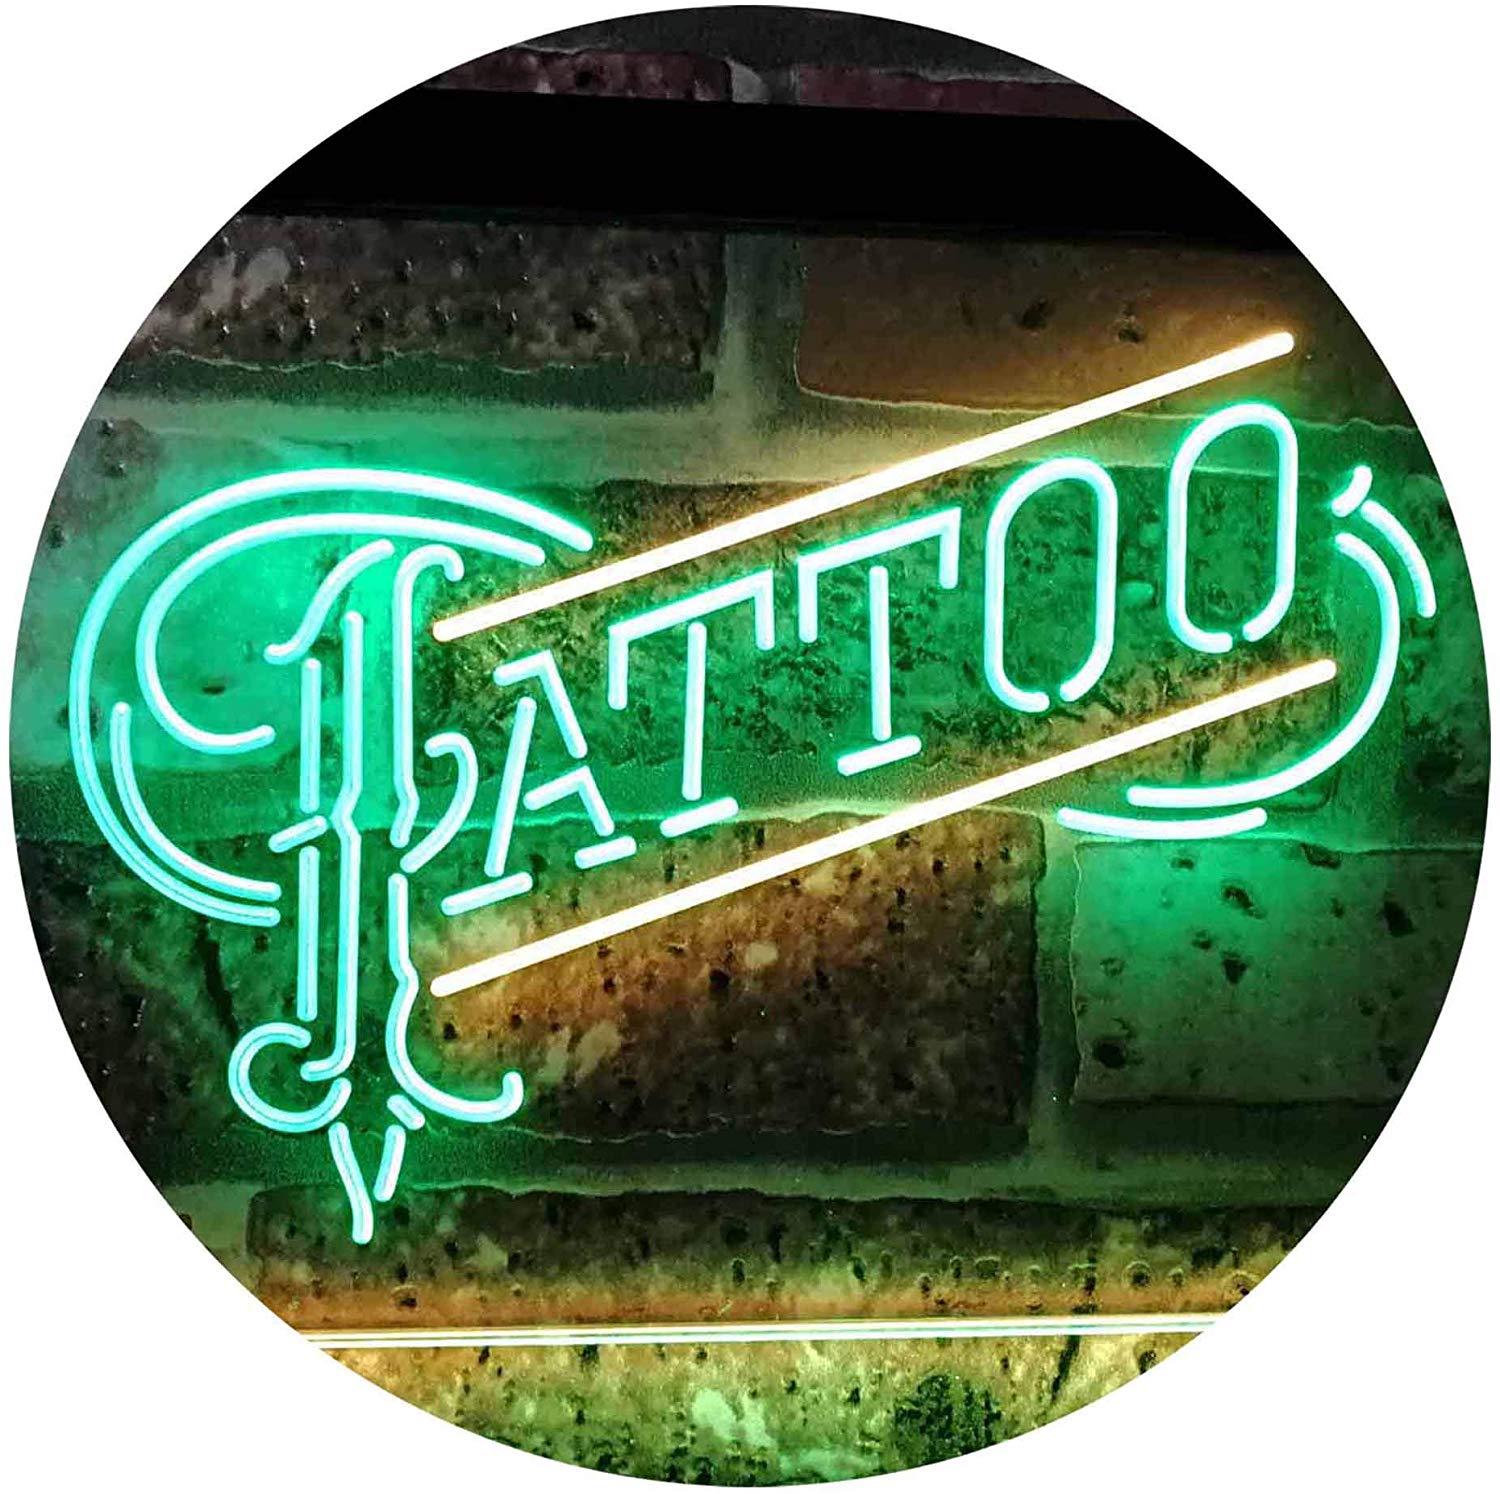 24/7 Answering Service for Tattoo Shops & Piercing Studios